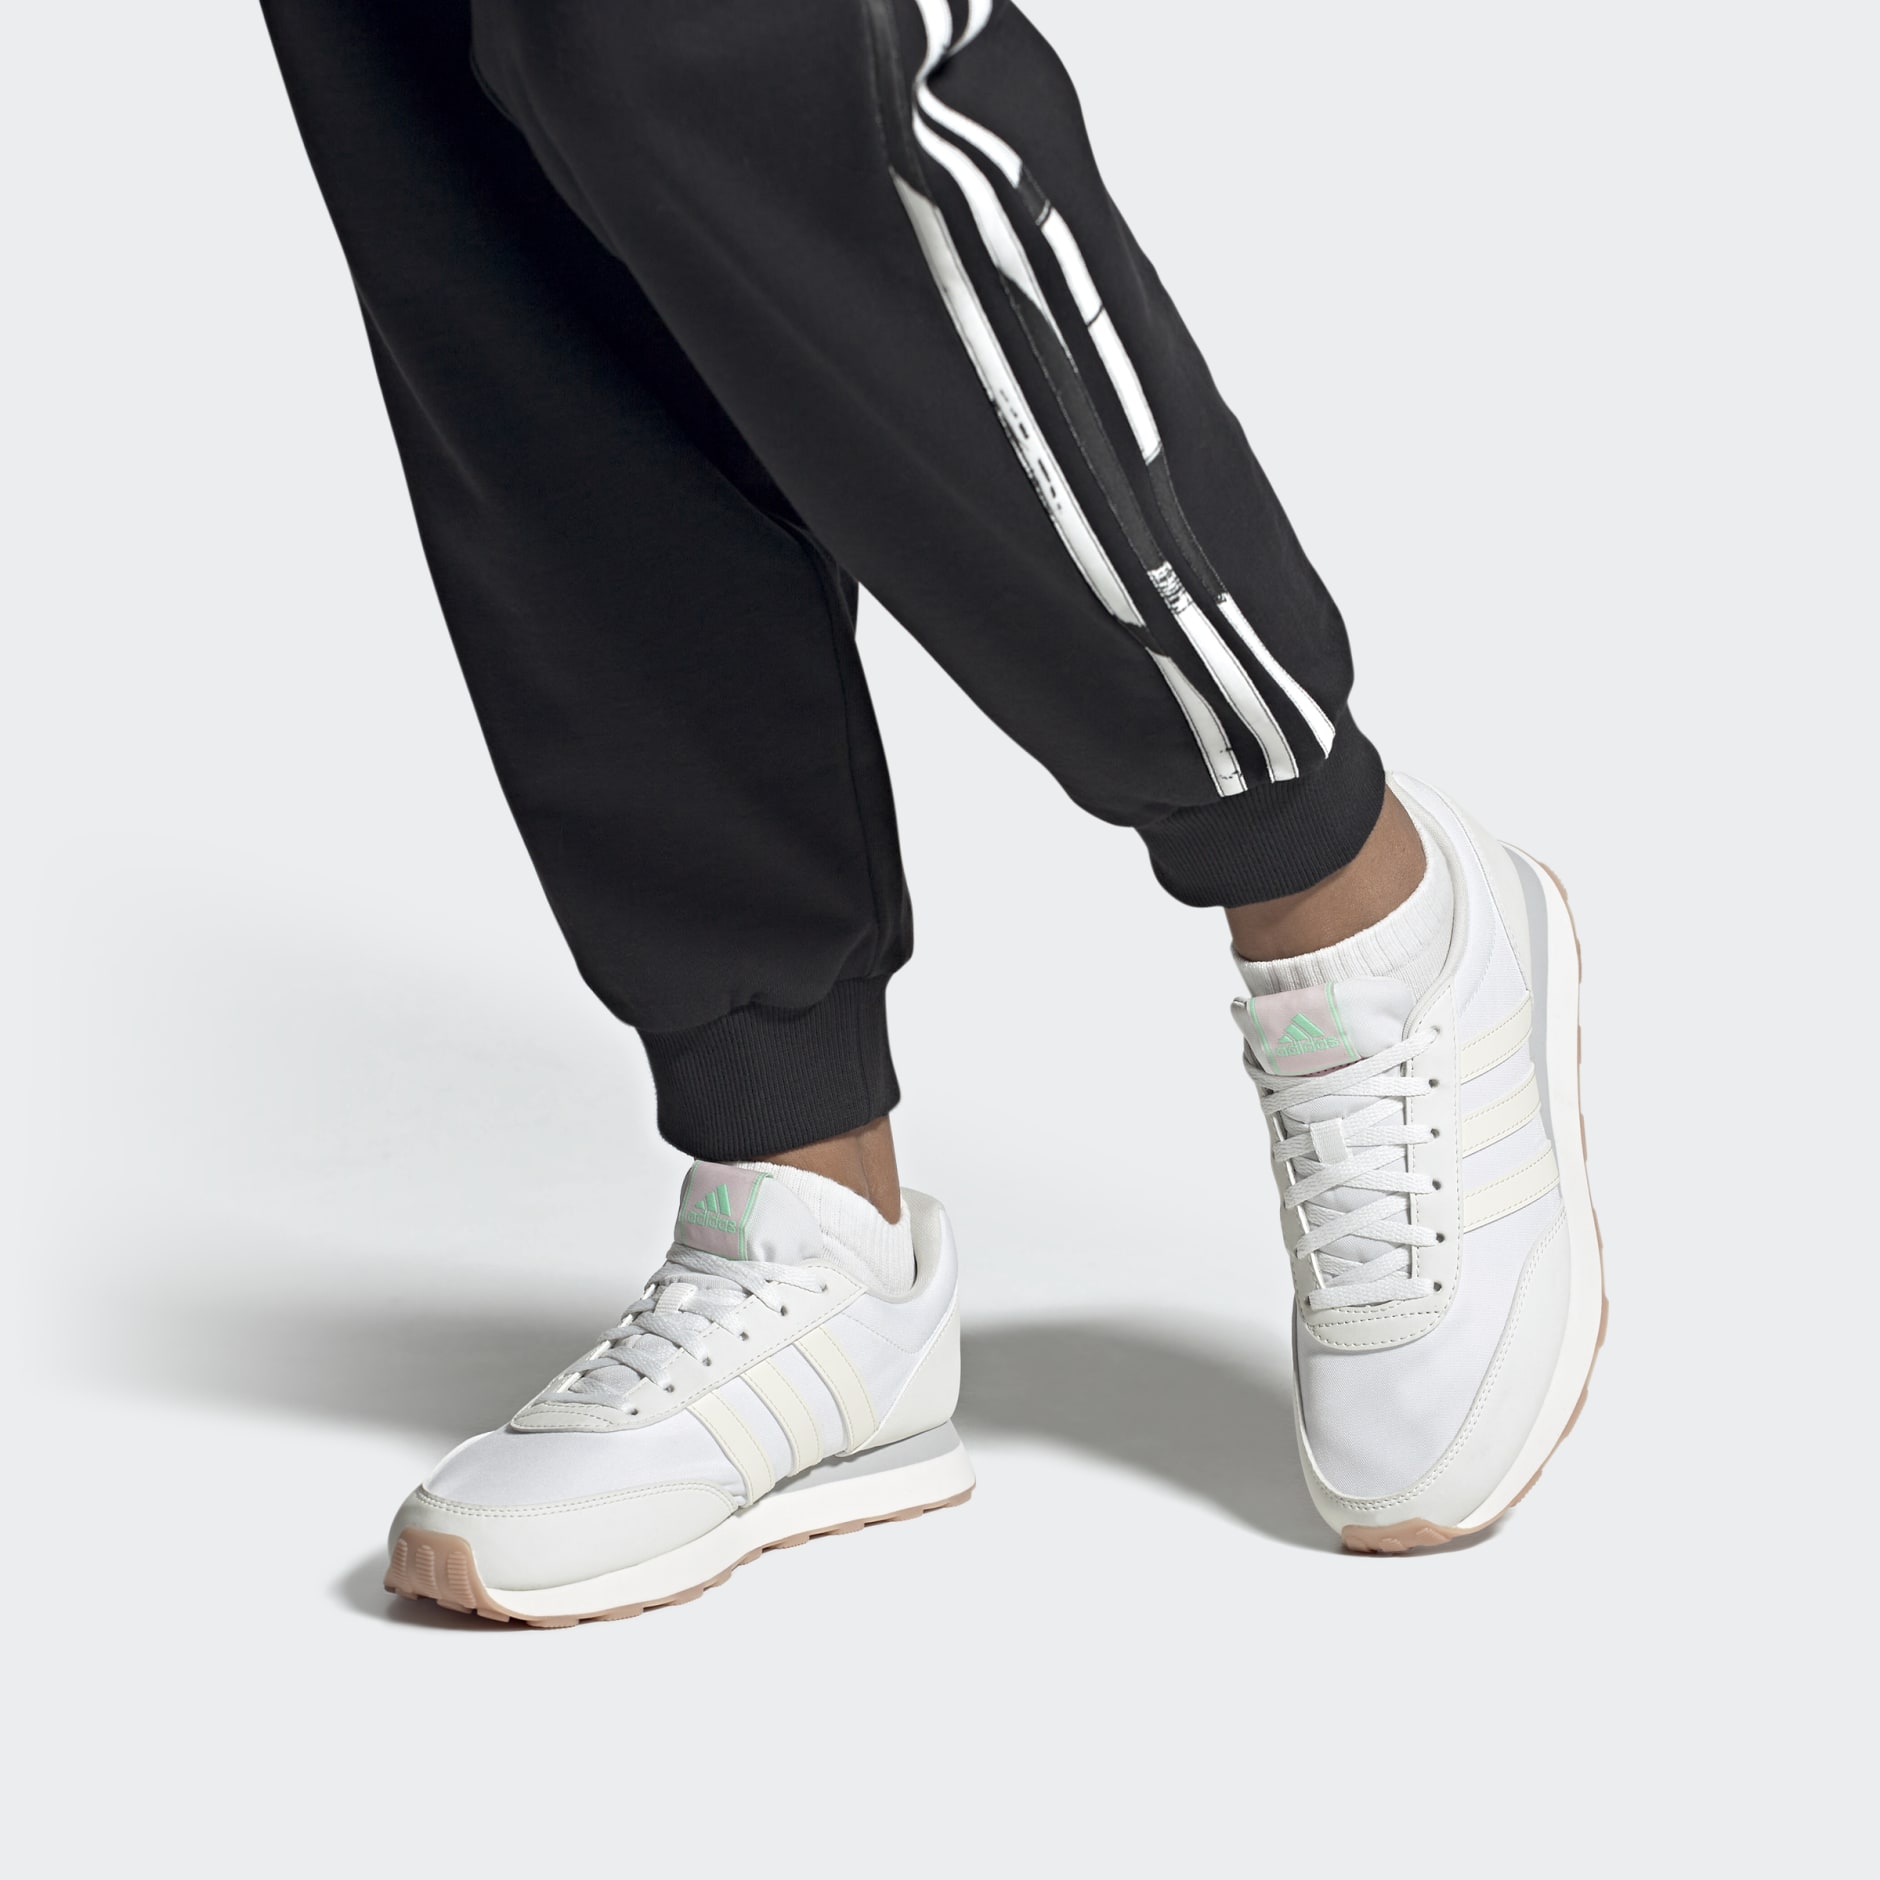 Women's Shoes - Run 60s 3.0 Lifestyle Running Shoes - White | adidas Egypt